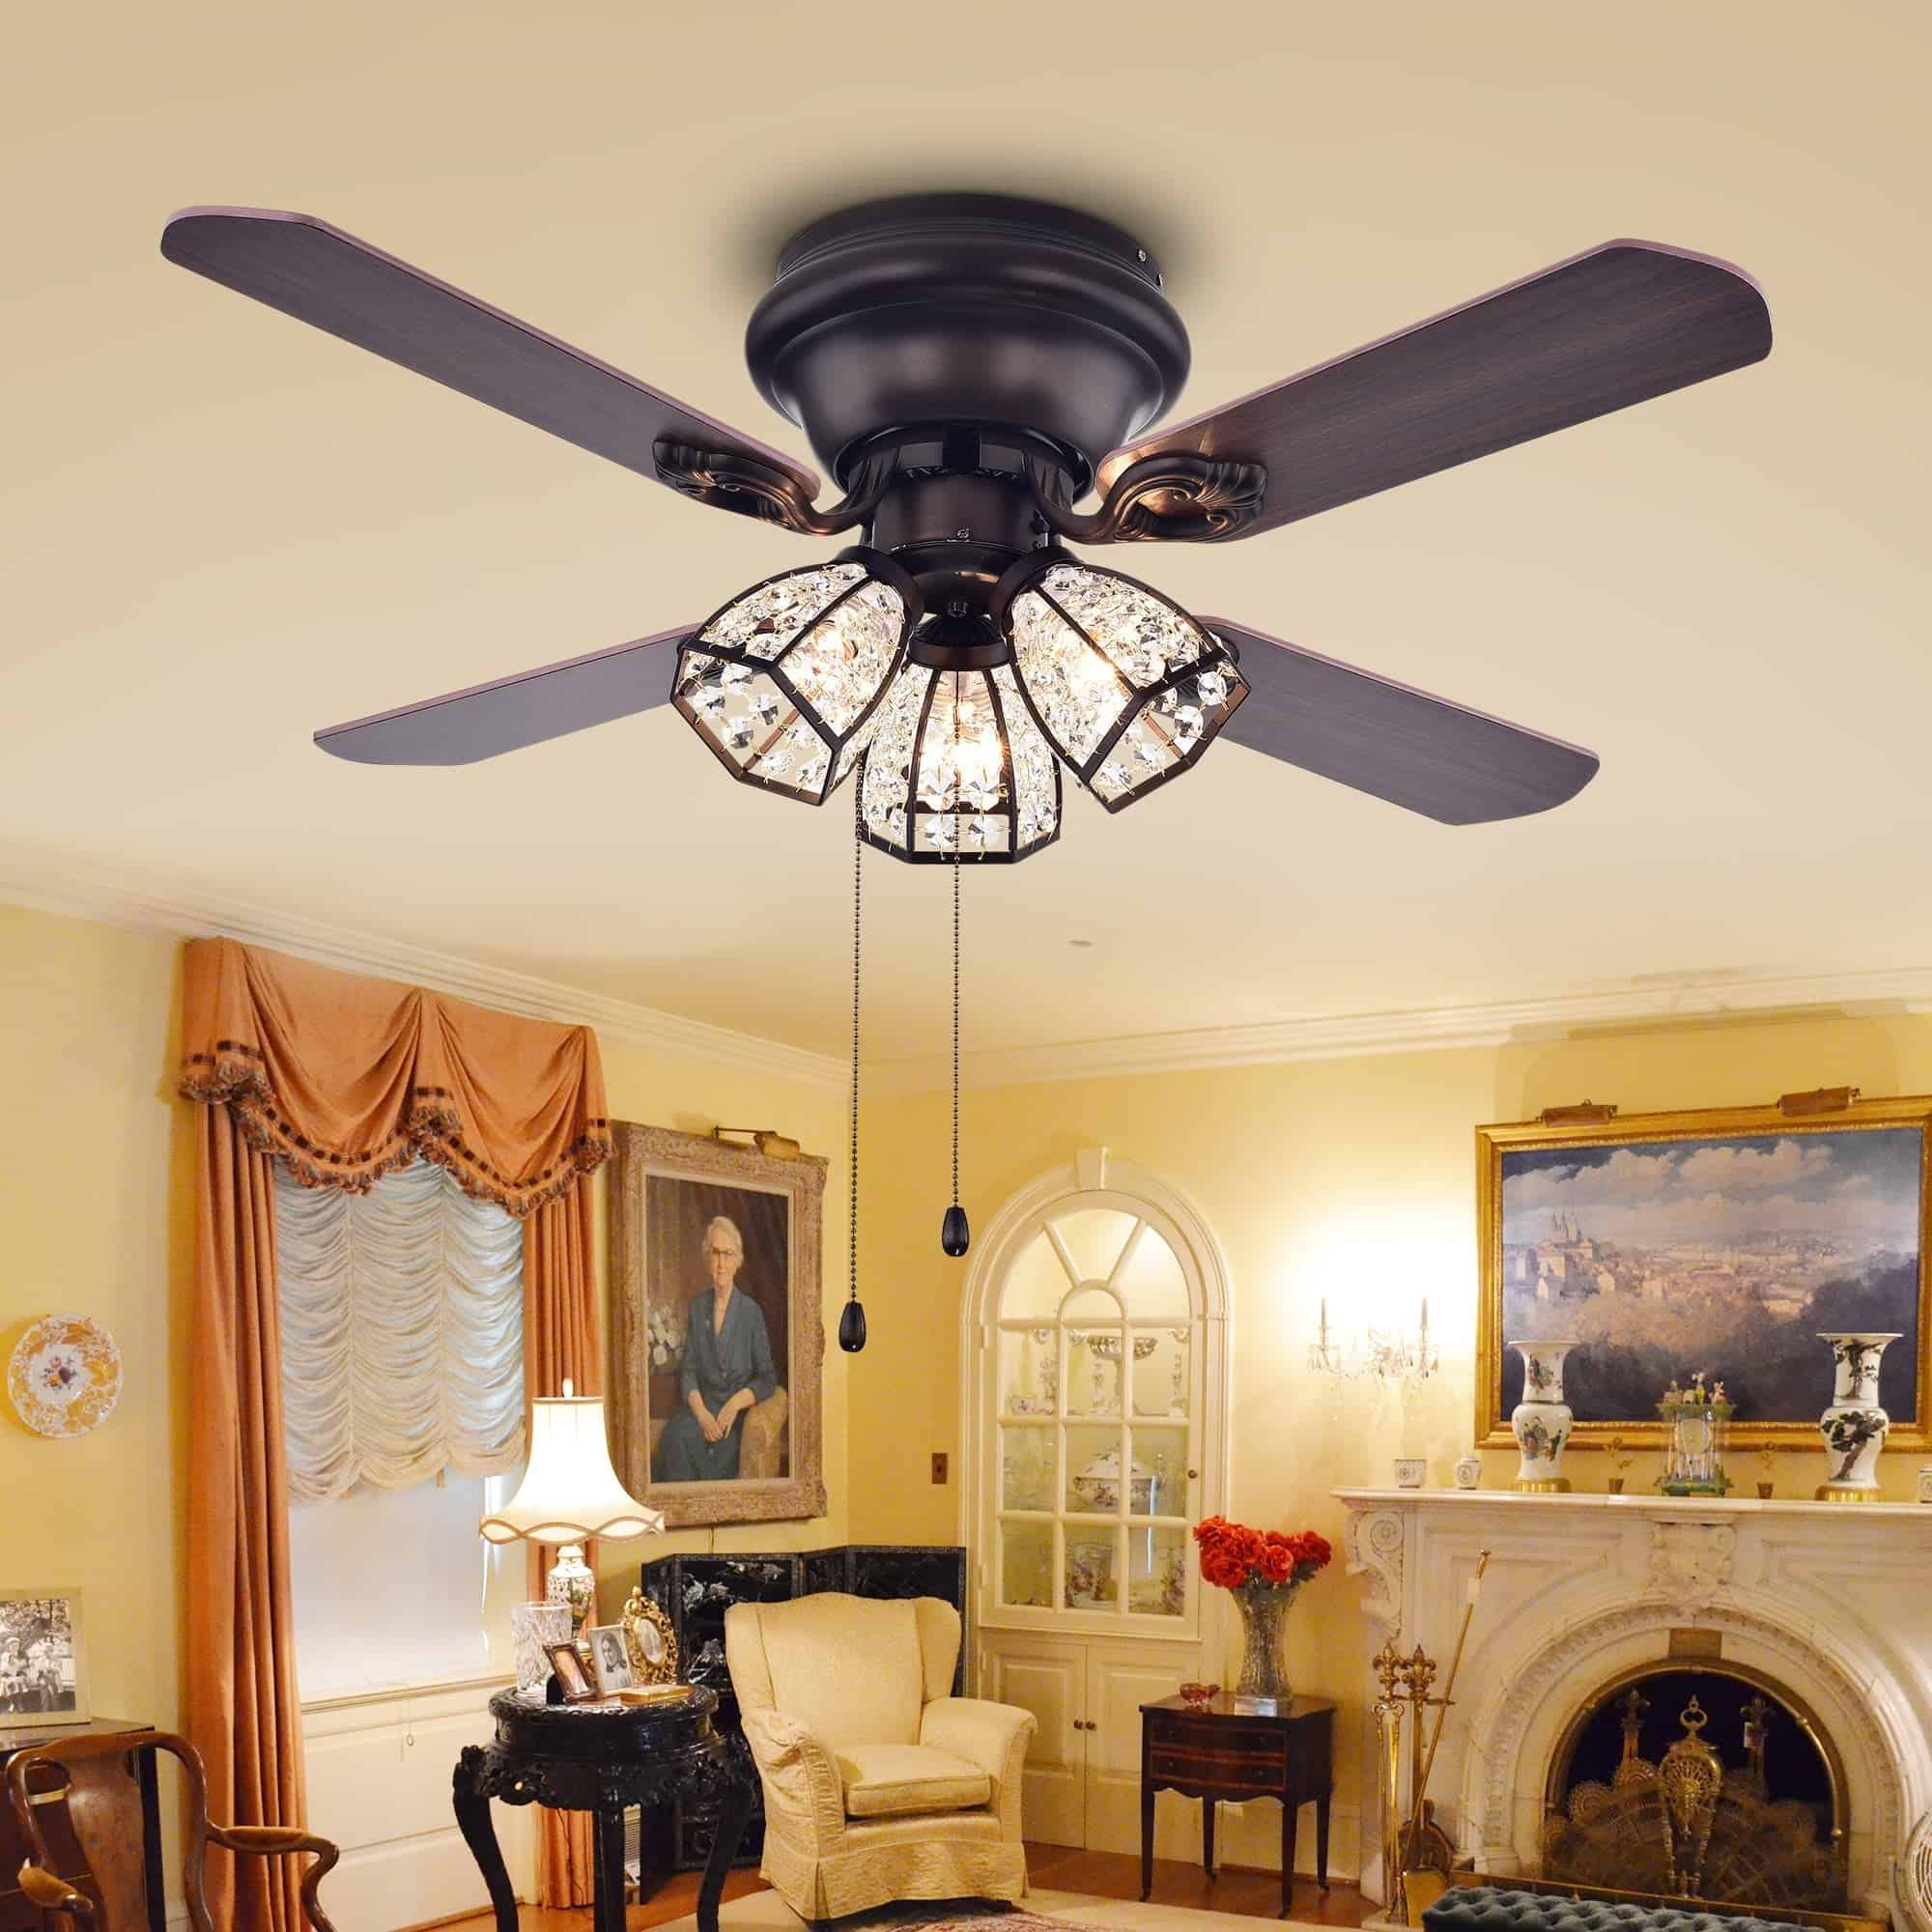 These 16 VintageStyle Ceiling Fans Will Blow You Away